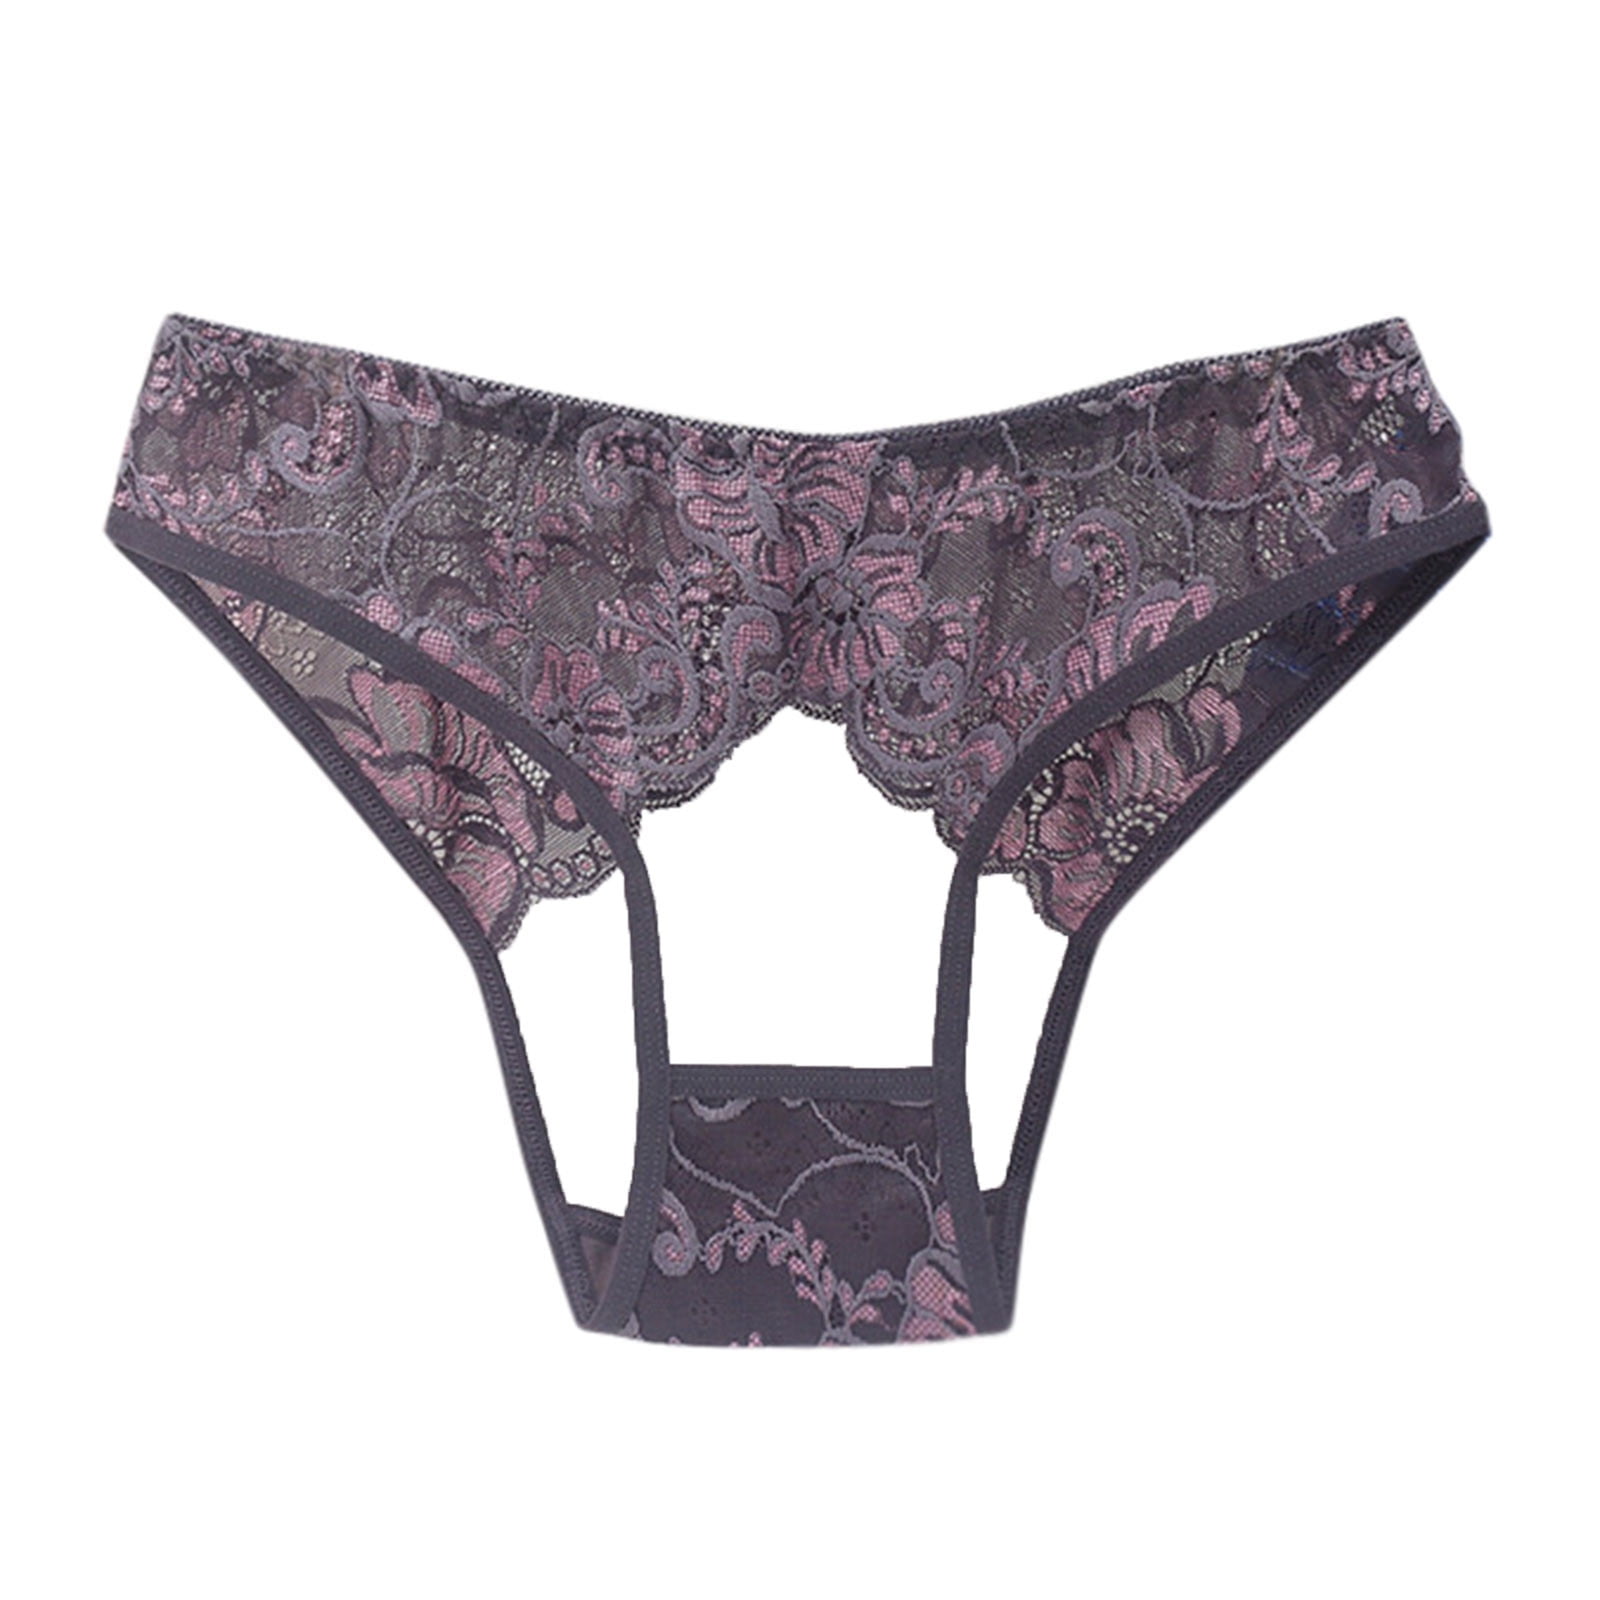 Women's Lace Panties, Fashion Style, Antibacterial Activity